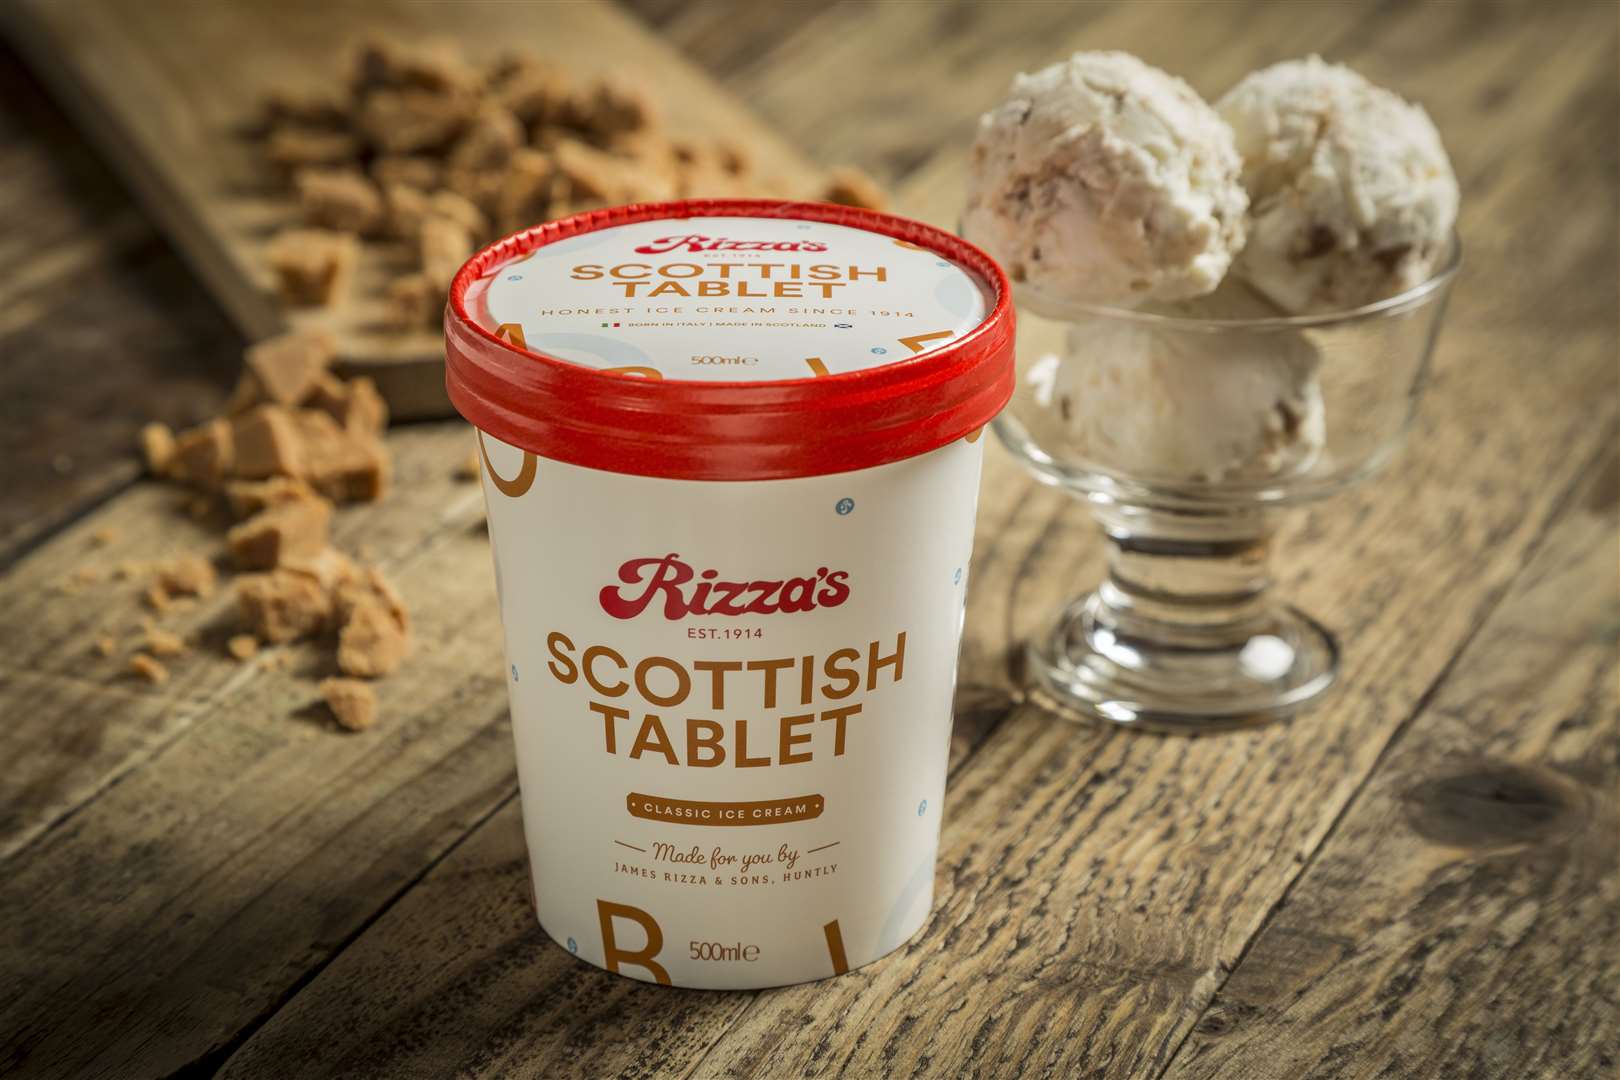 Rizza's ice-cream will be featured later in June